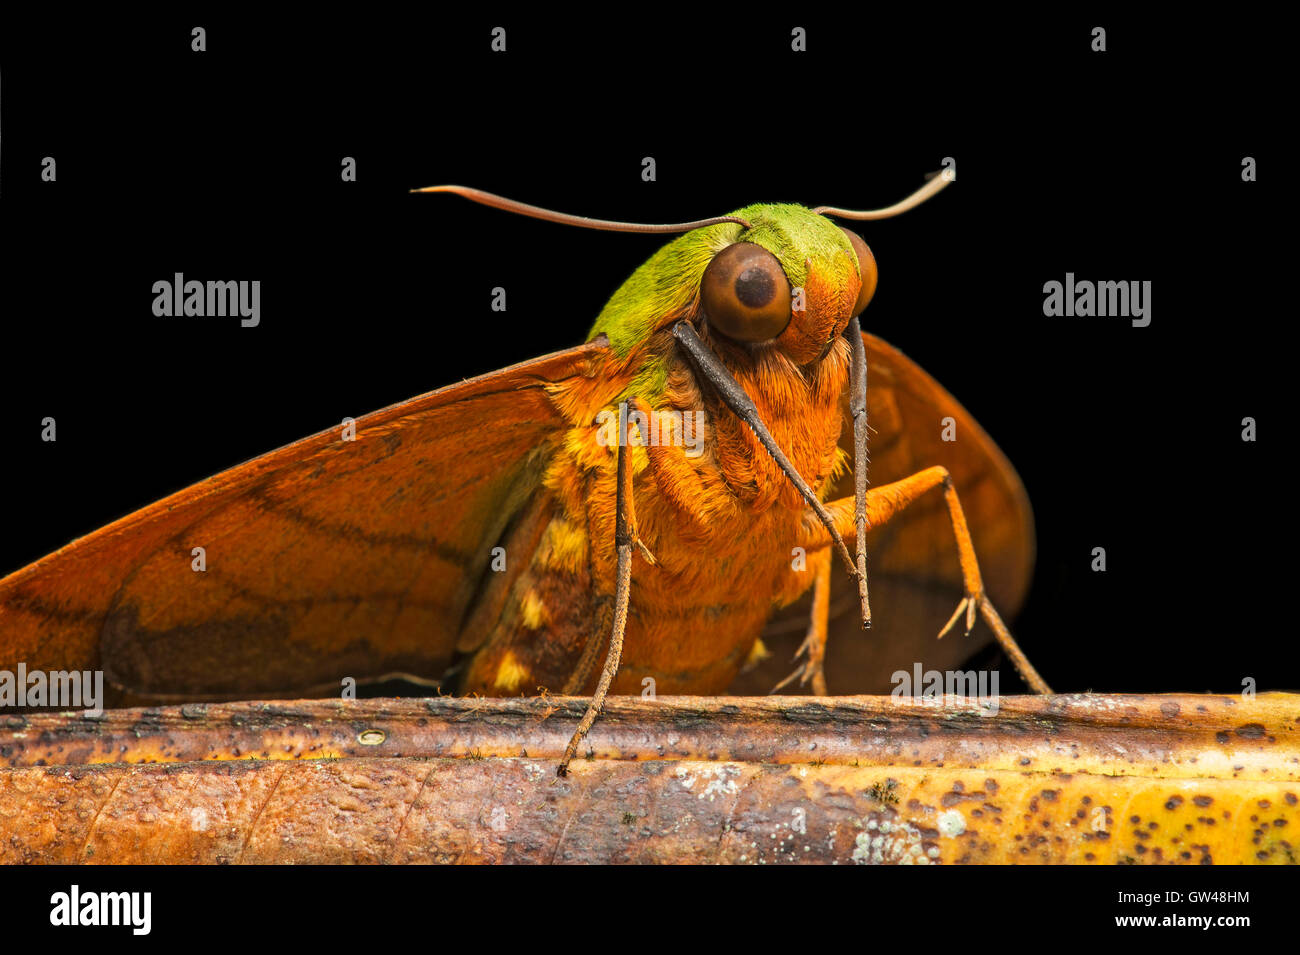 Rainforest Moths High Resolution Stock Photography and Images - Alamy